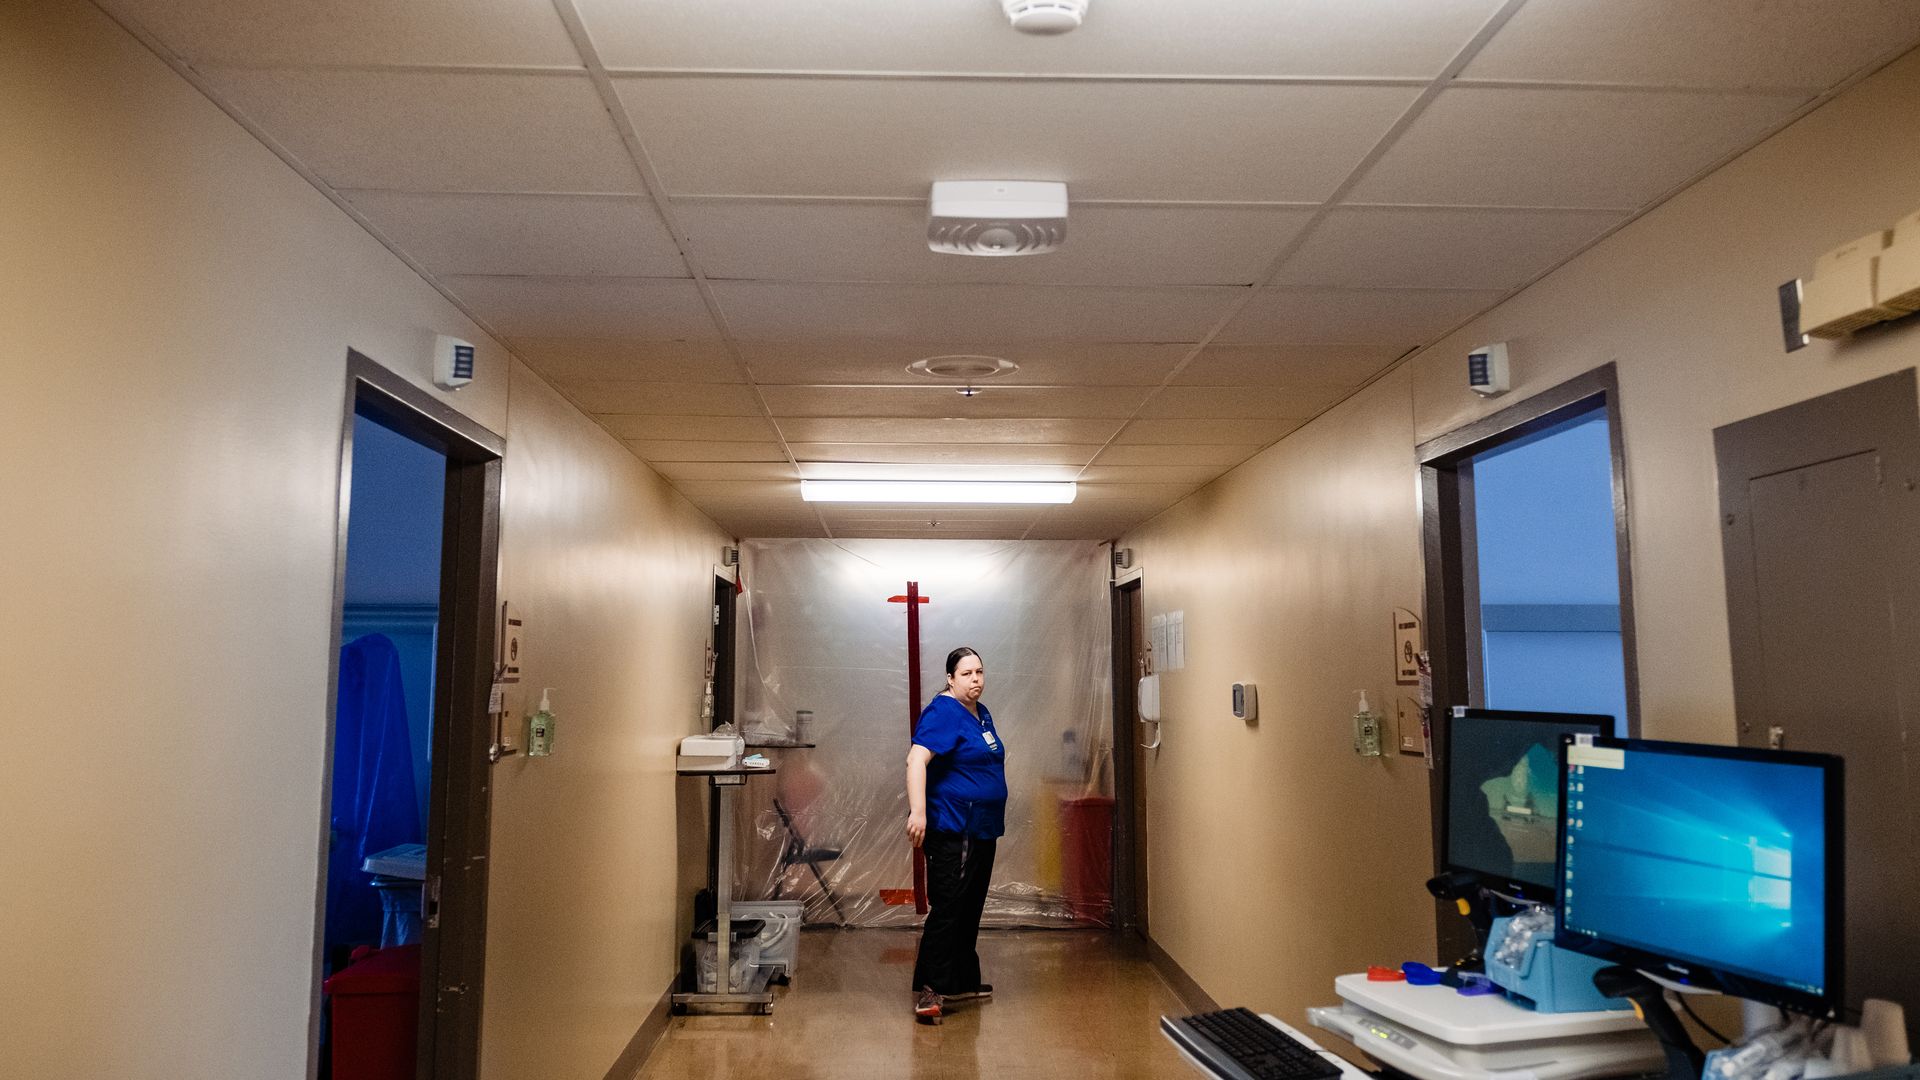 A nurse stands in a hospital hallway with equipment scattered around.